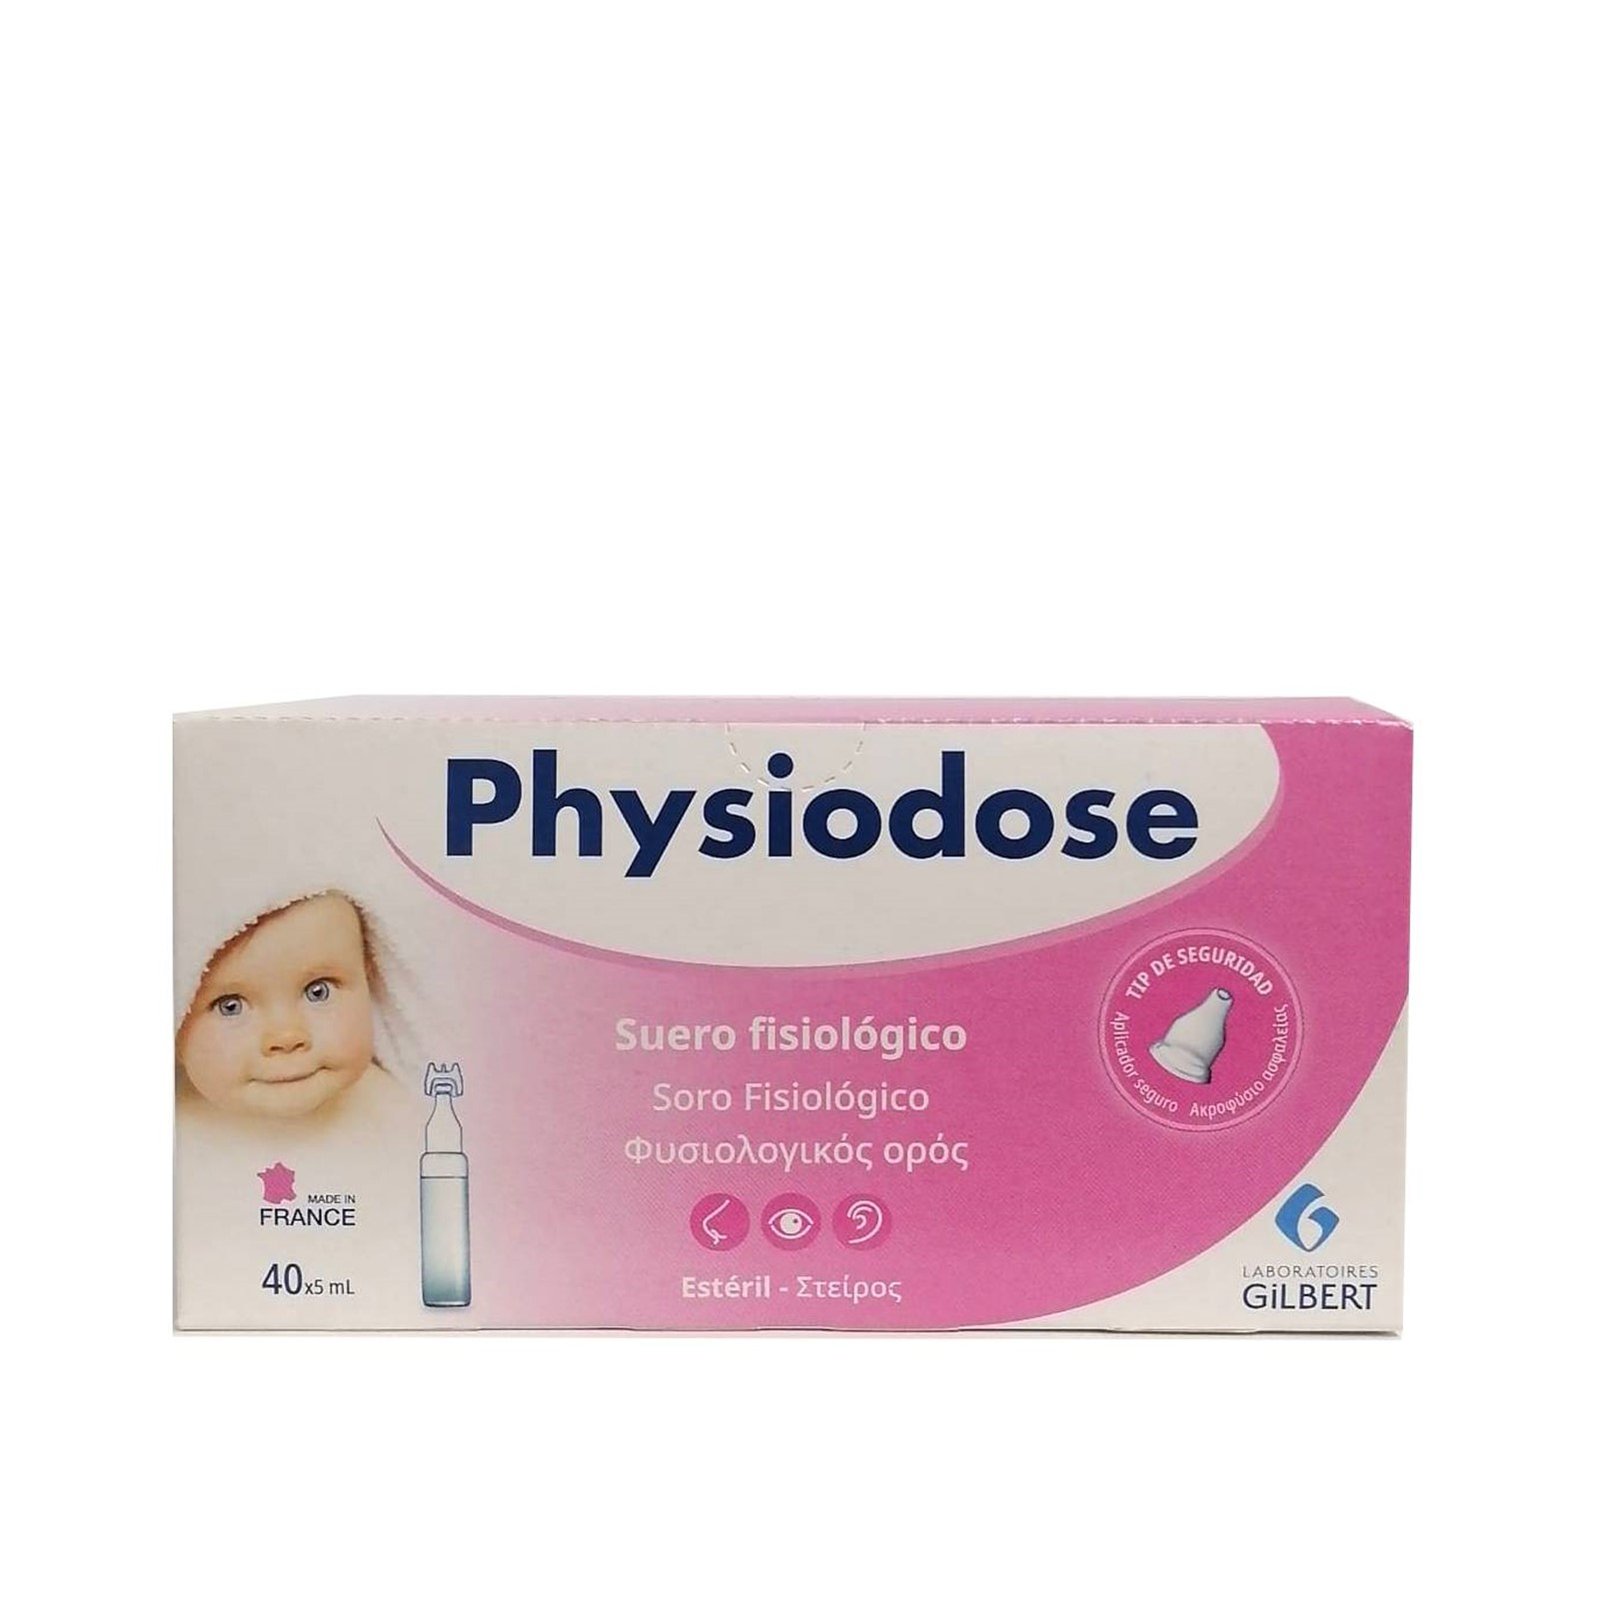 Physiodose Physiological Serum - Box of 40 Single Doses